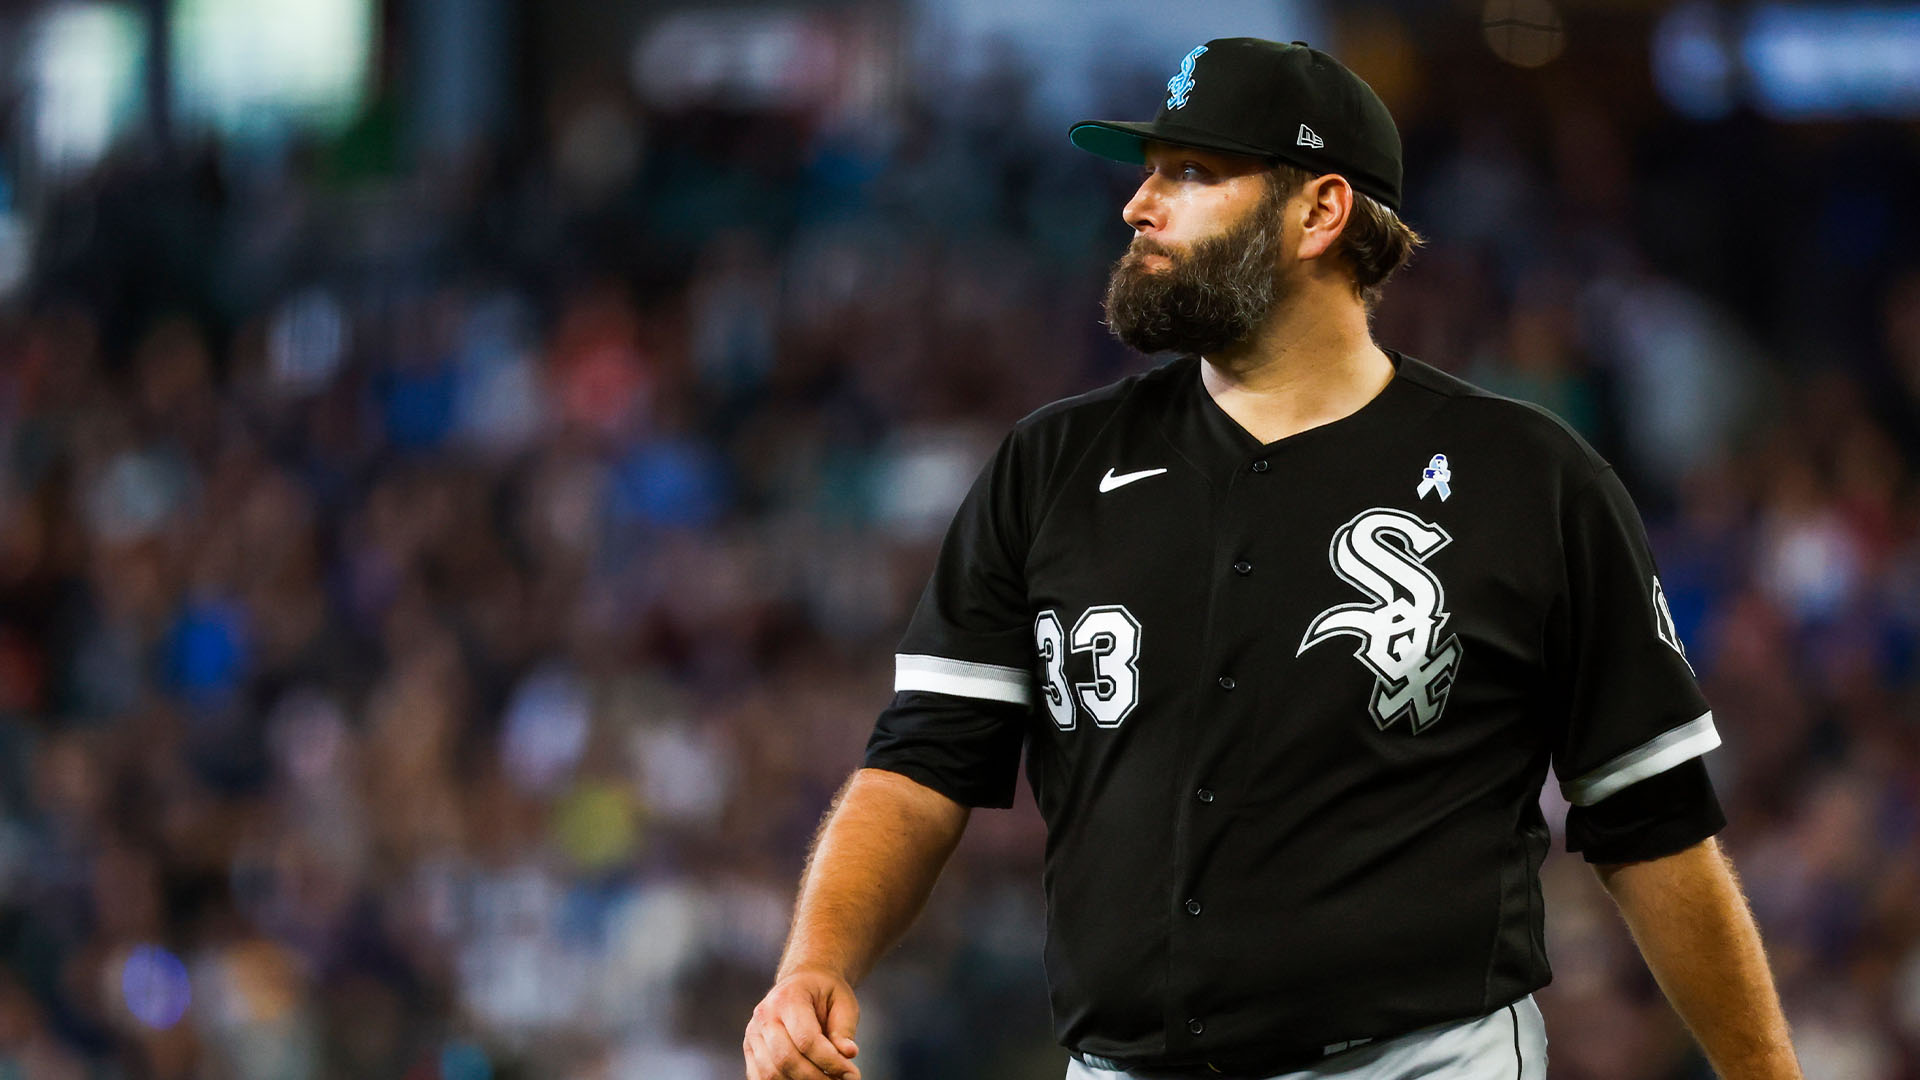 White Sox' Lance Lynn dominant in loss to Mariners – NBC Sports Chicago